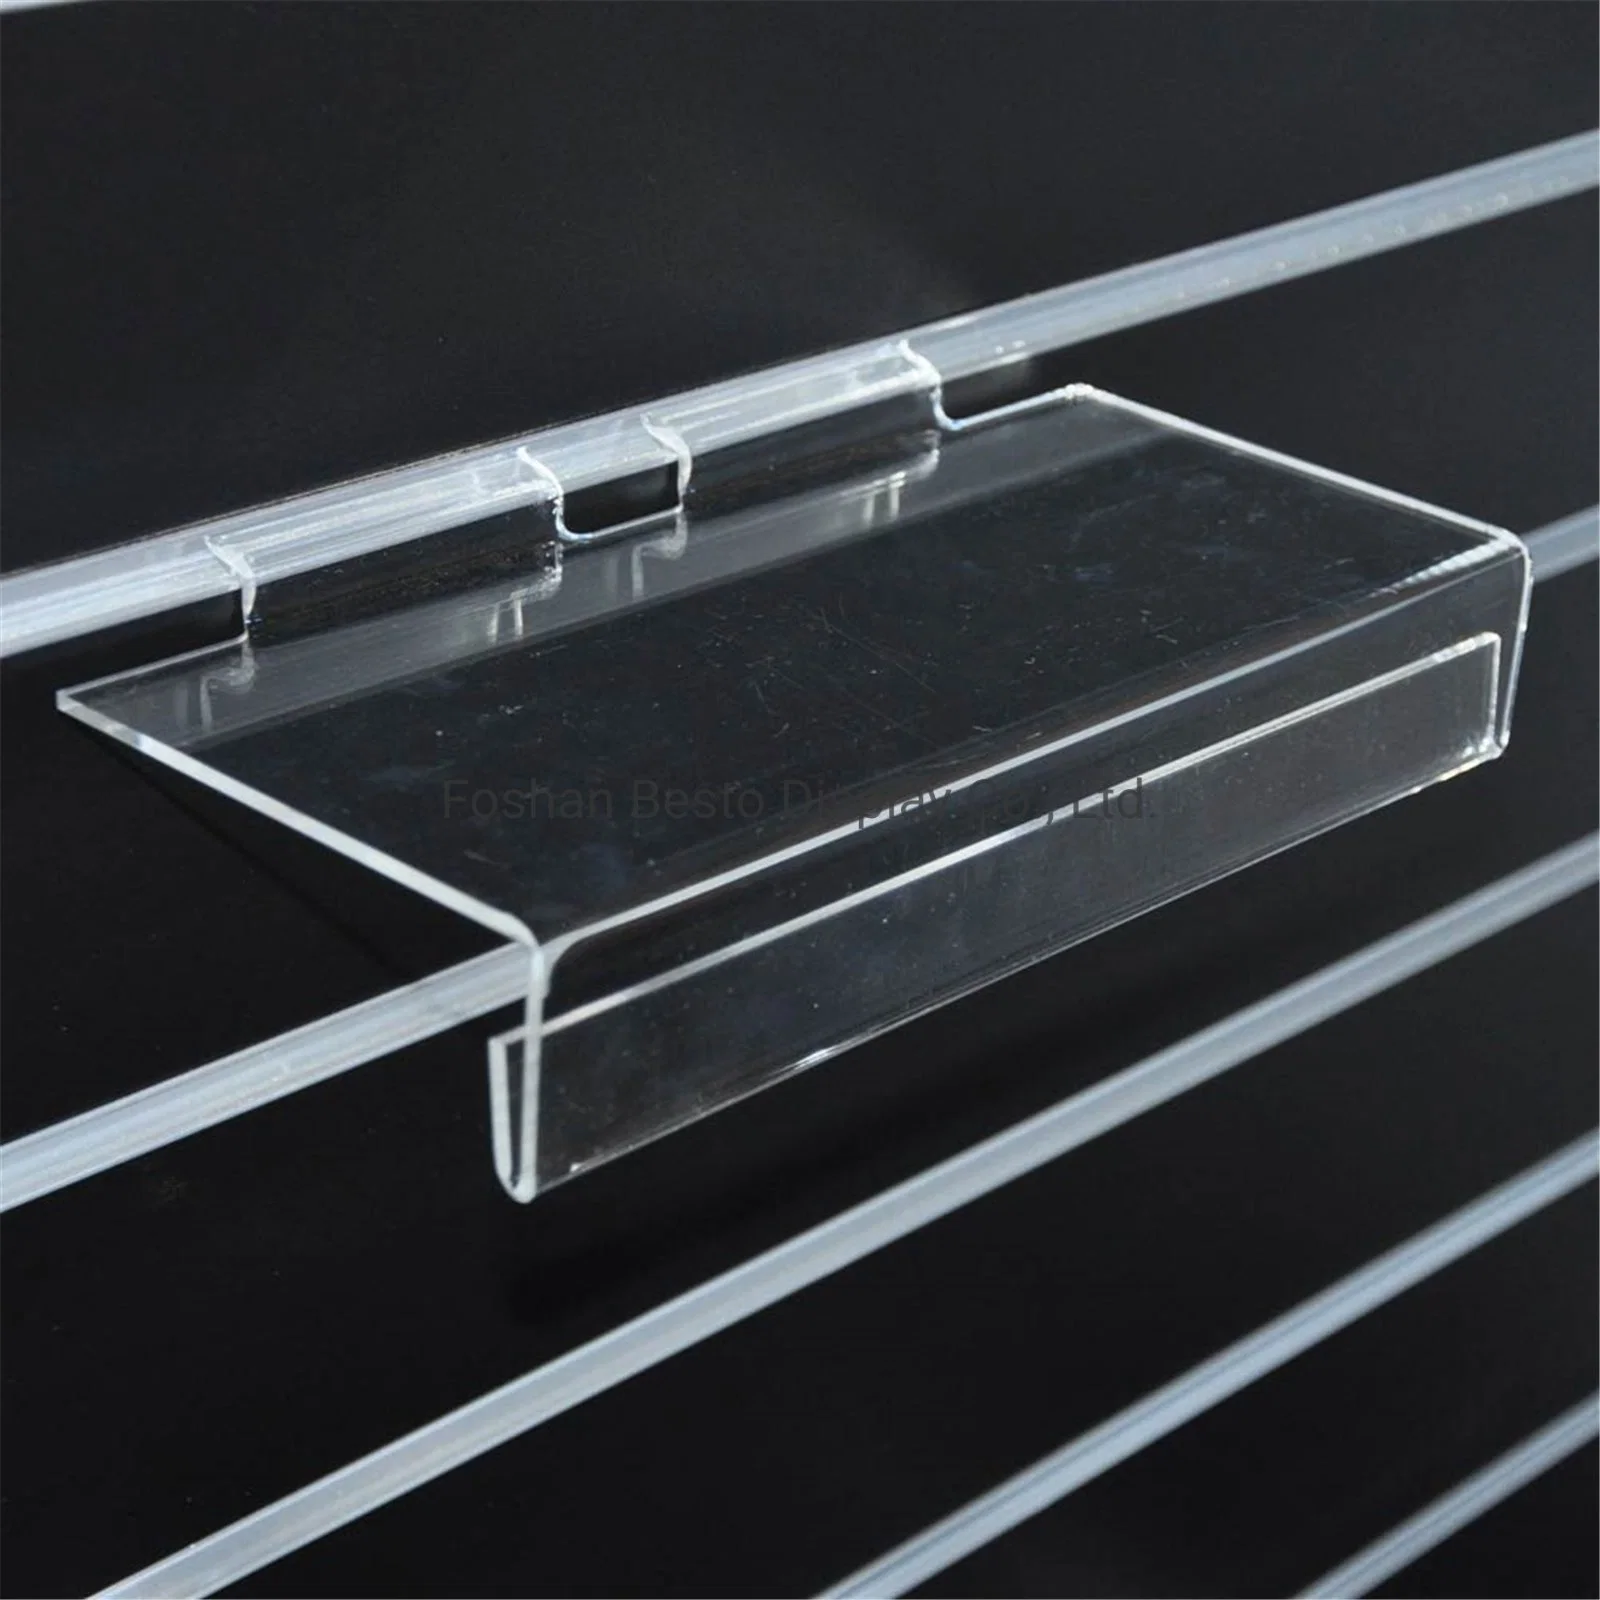 Slatwall Shoe Holder-Clear Acrylic Shoe Display Stands Rack Holder for Shoes Display in Supermarket / Store